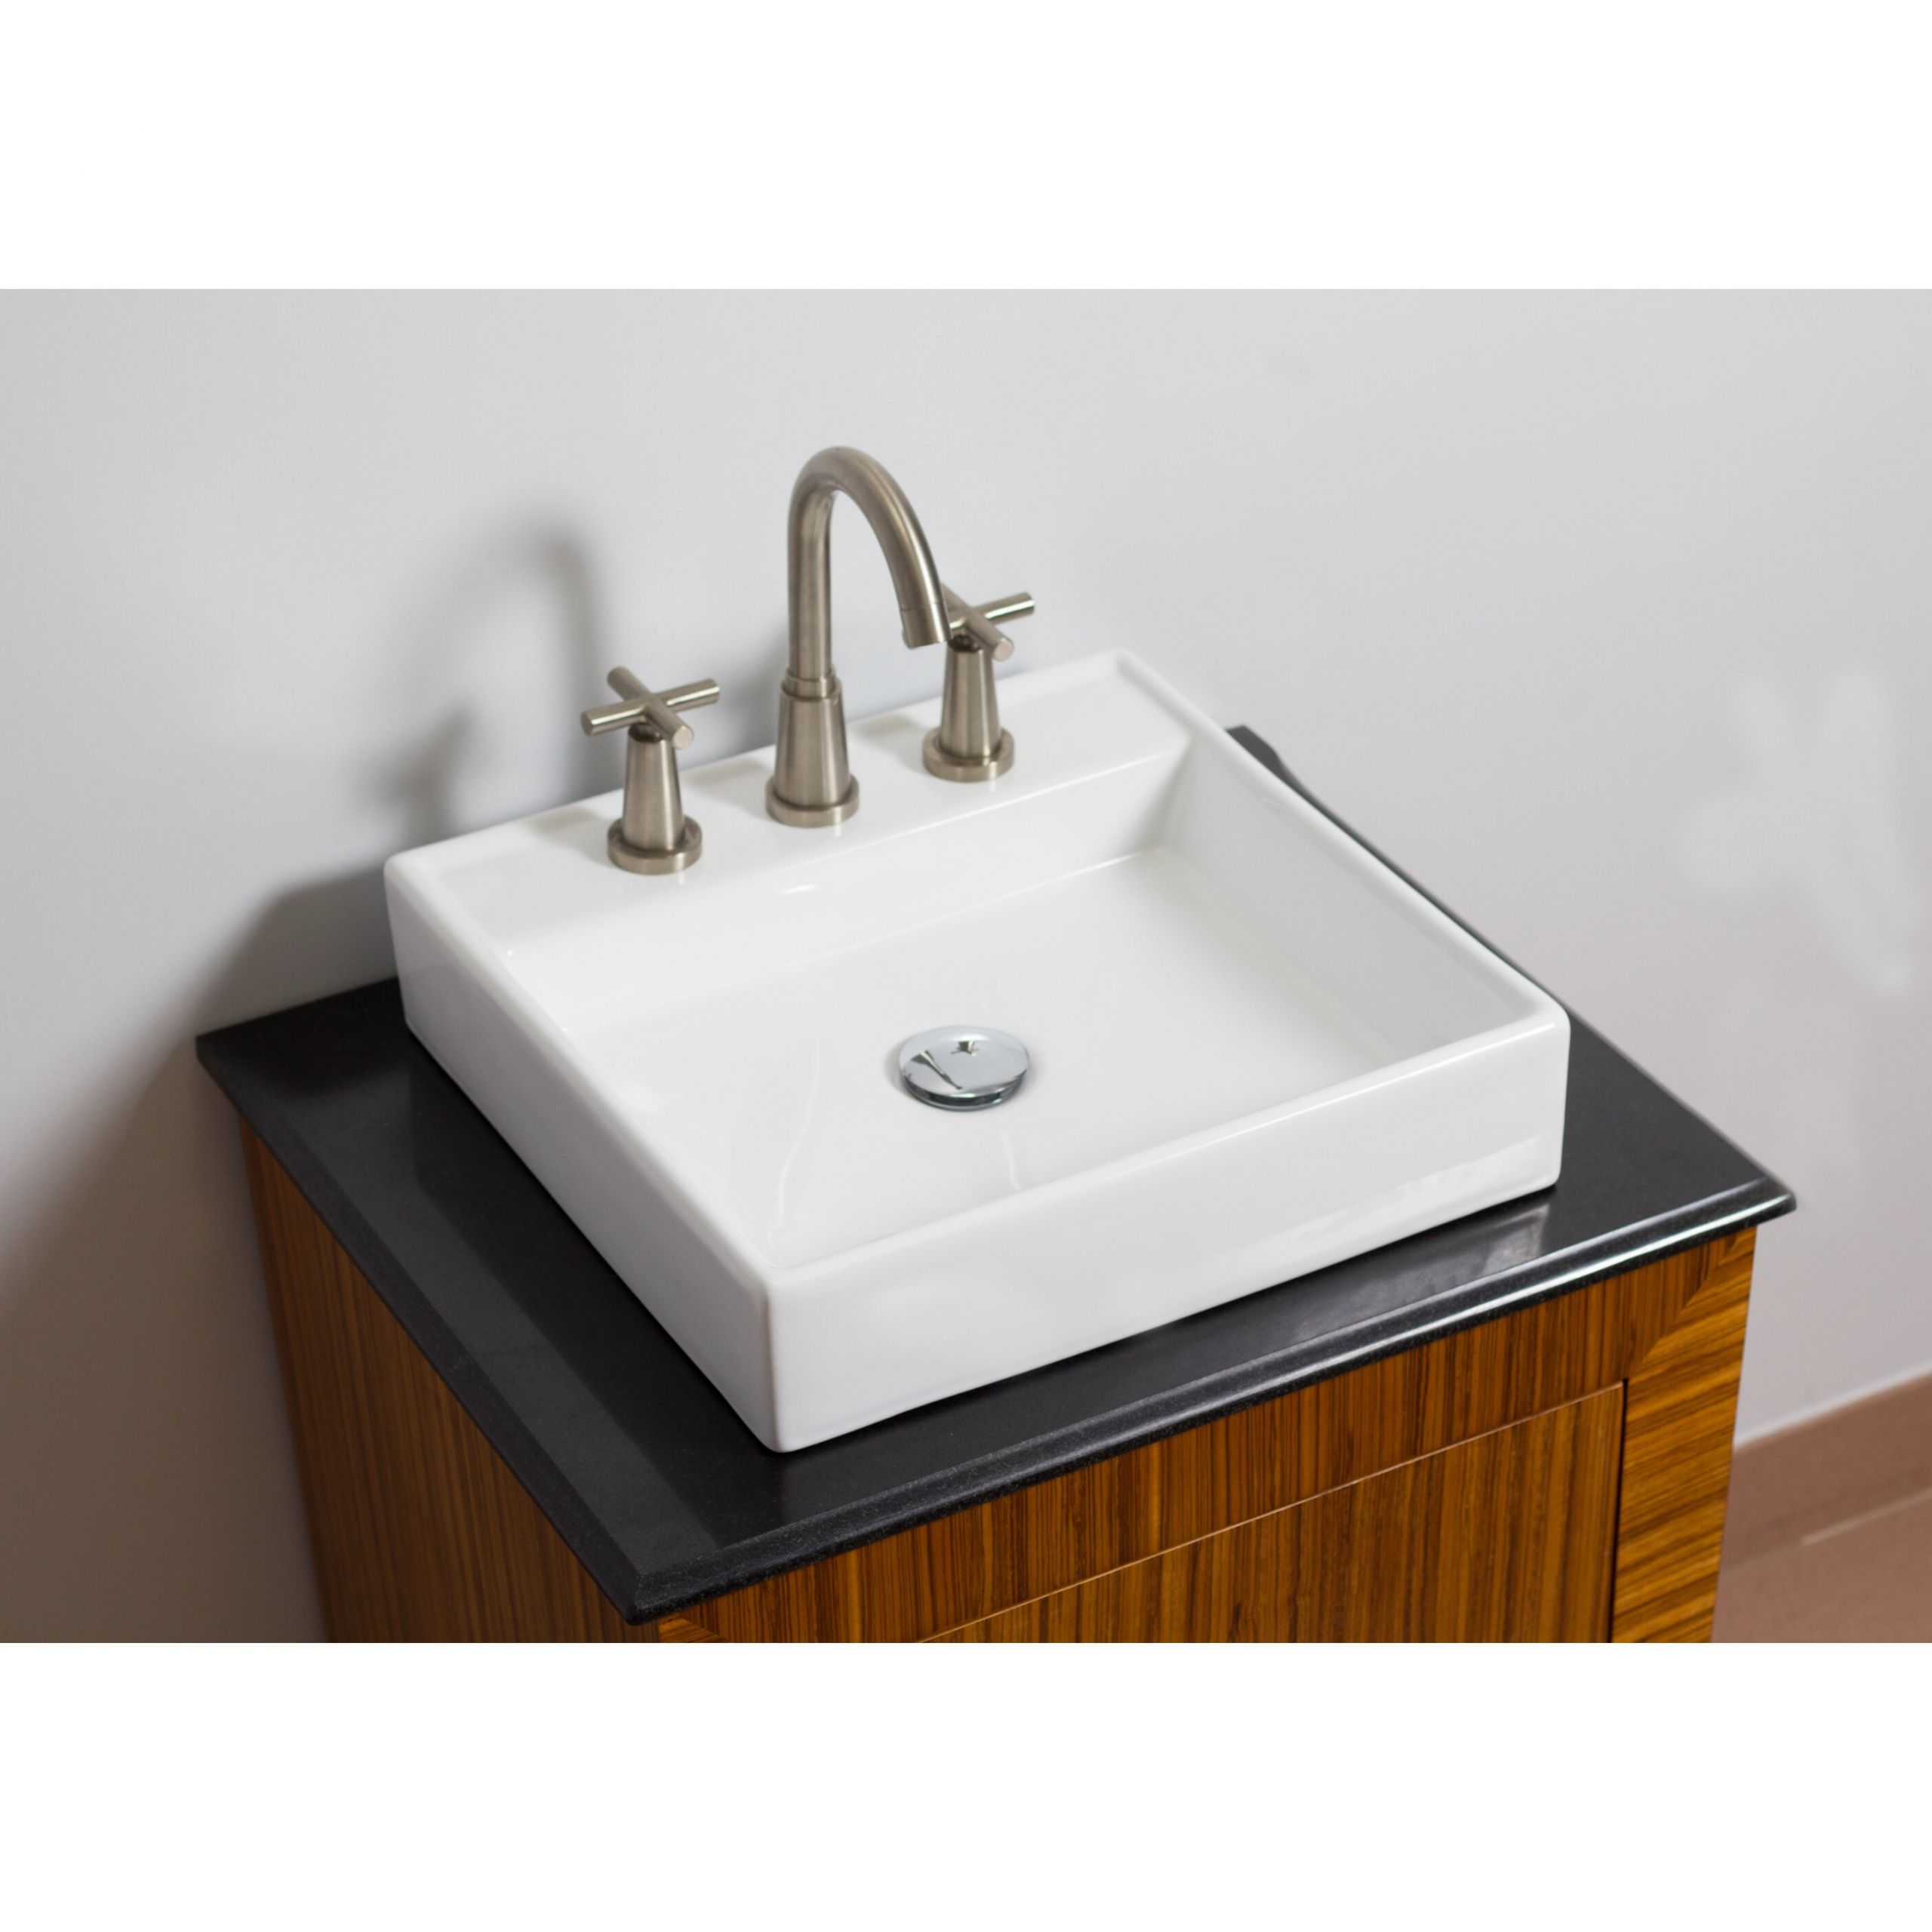 Square Vessel Bathroom Sink
 Wall Mounted Square Vessel Bathroom Sink